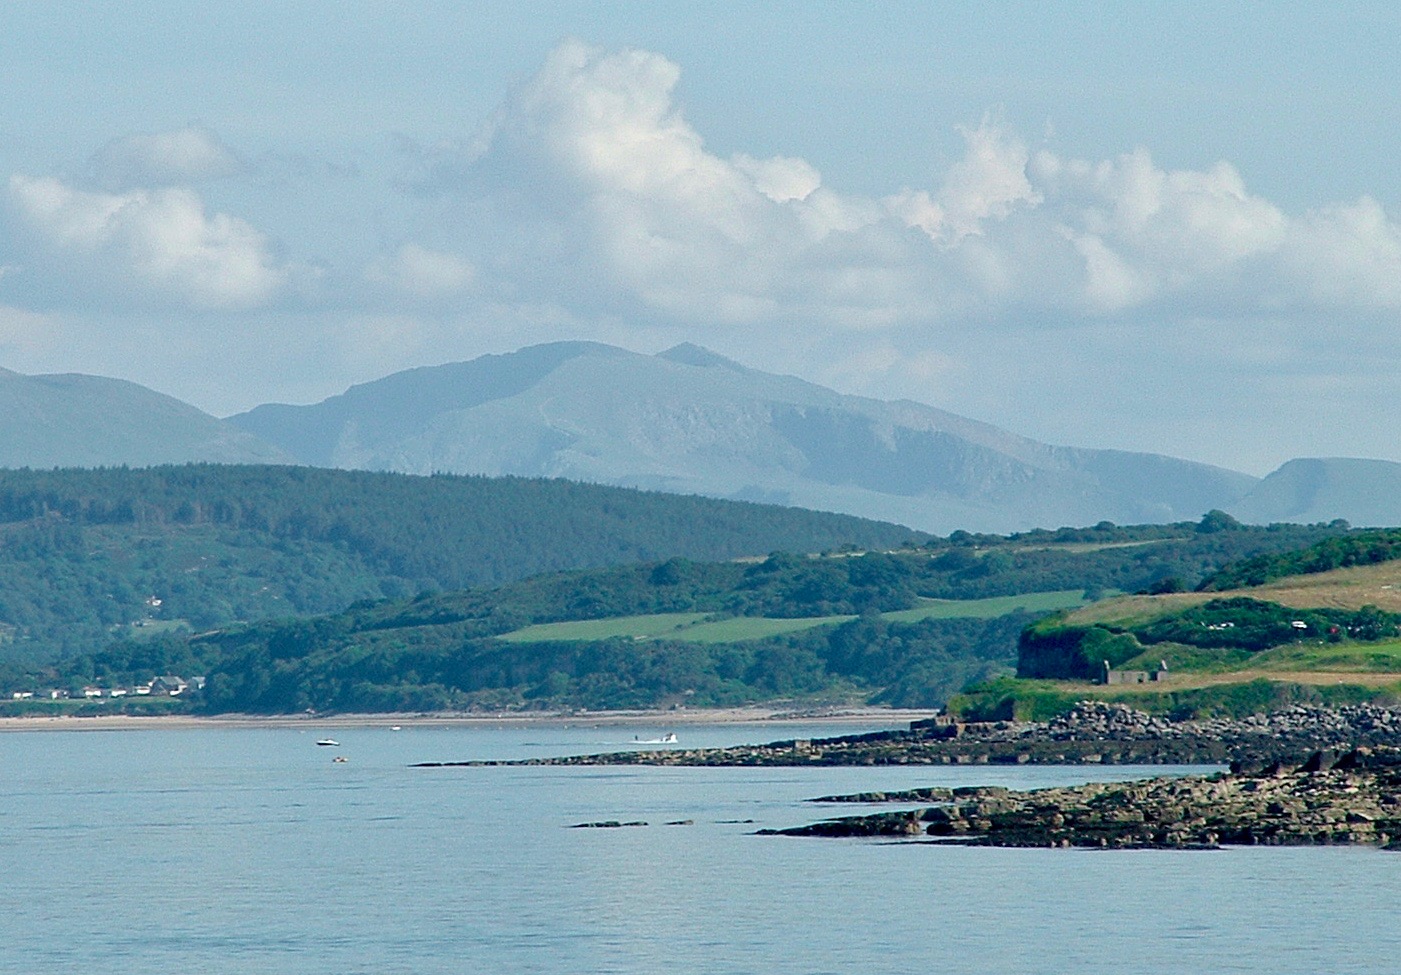 Snowdon, as seen from Anglesey (photo by Laurence Perkins)